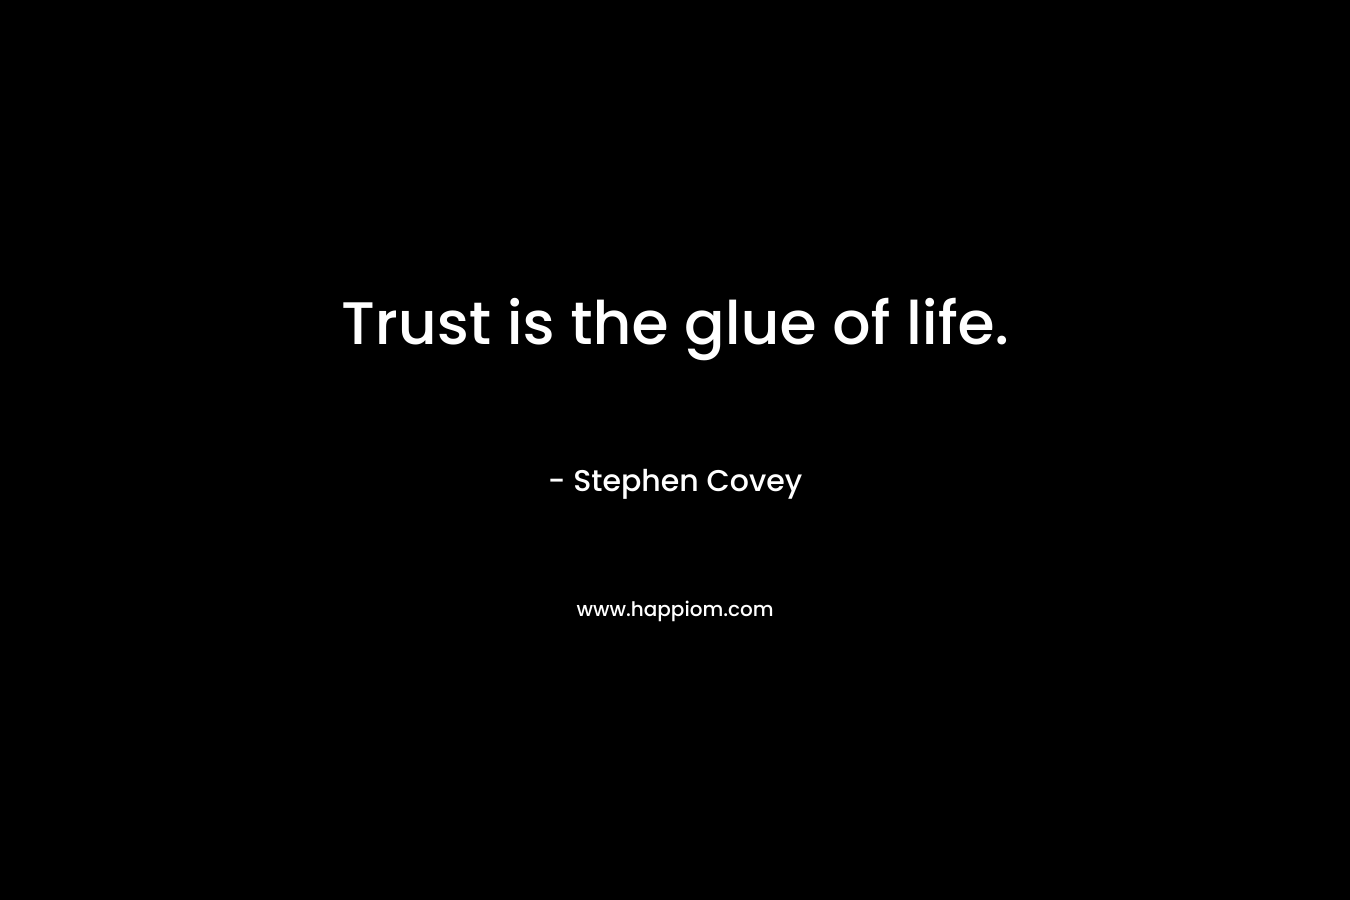 Trust is the glue of life.